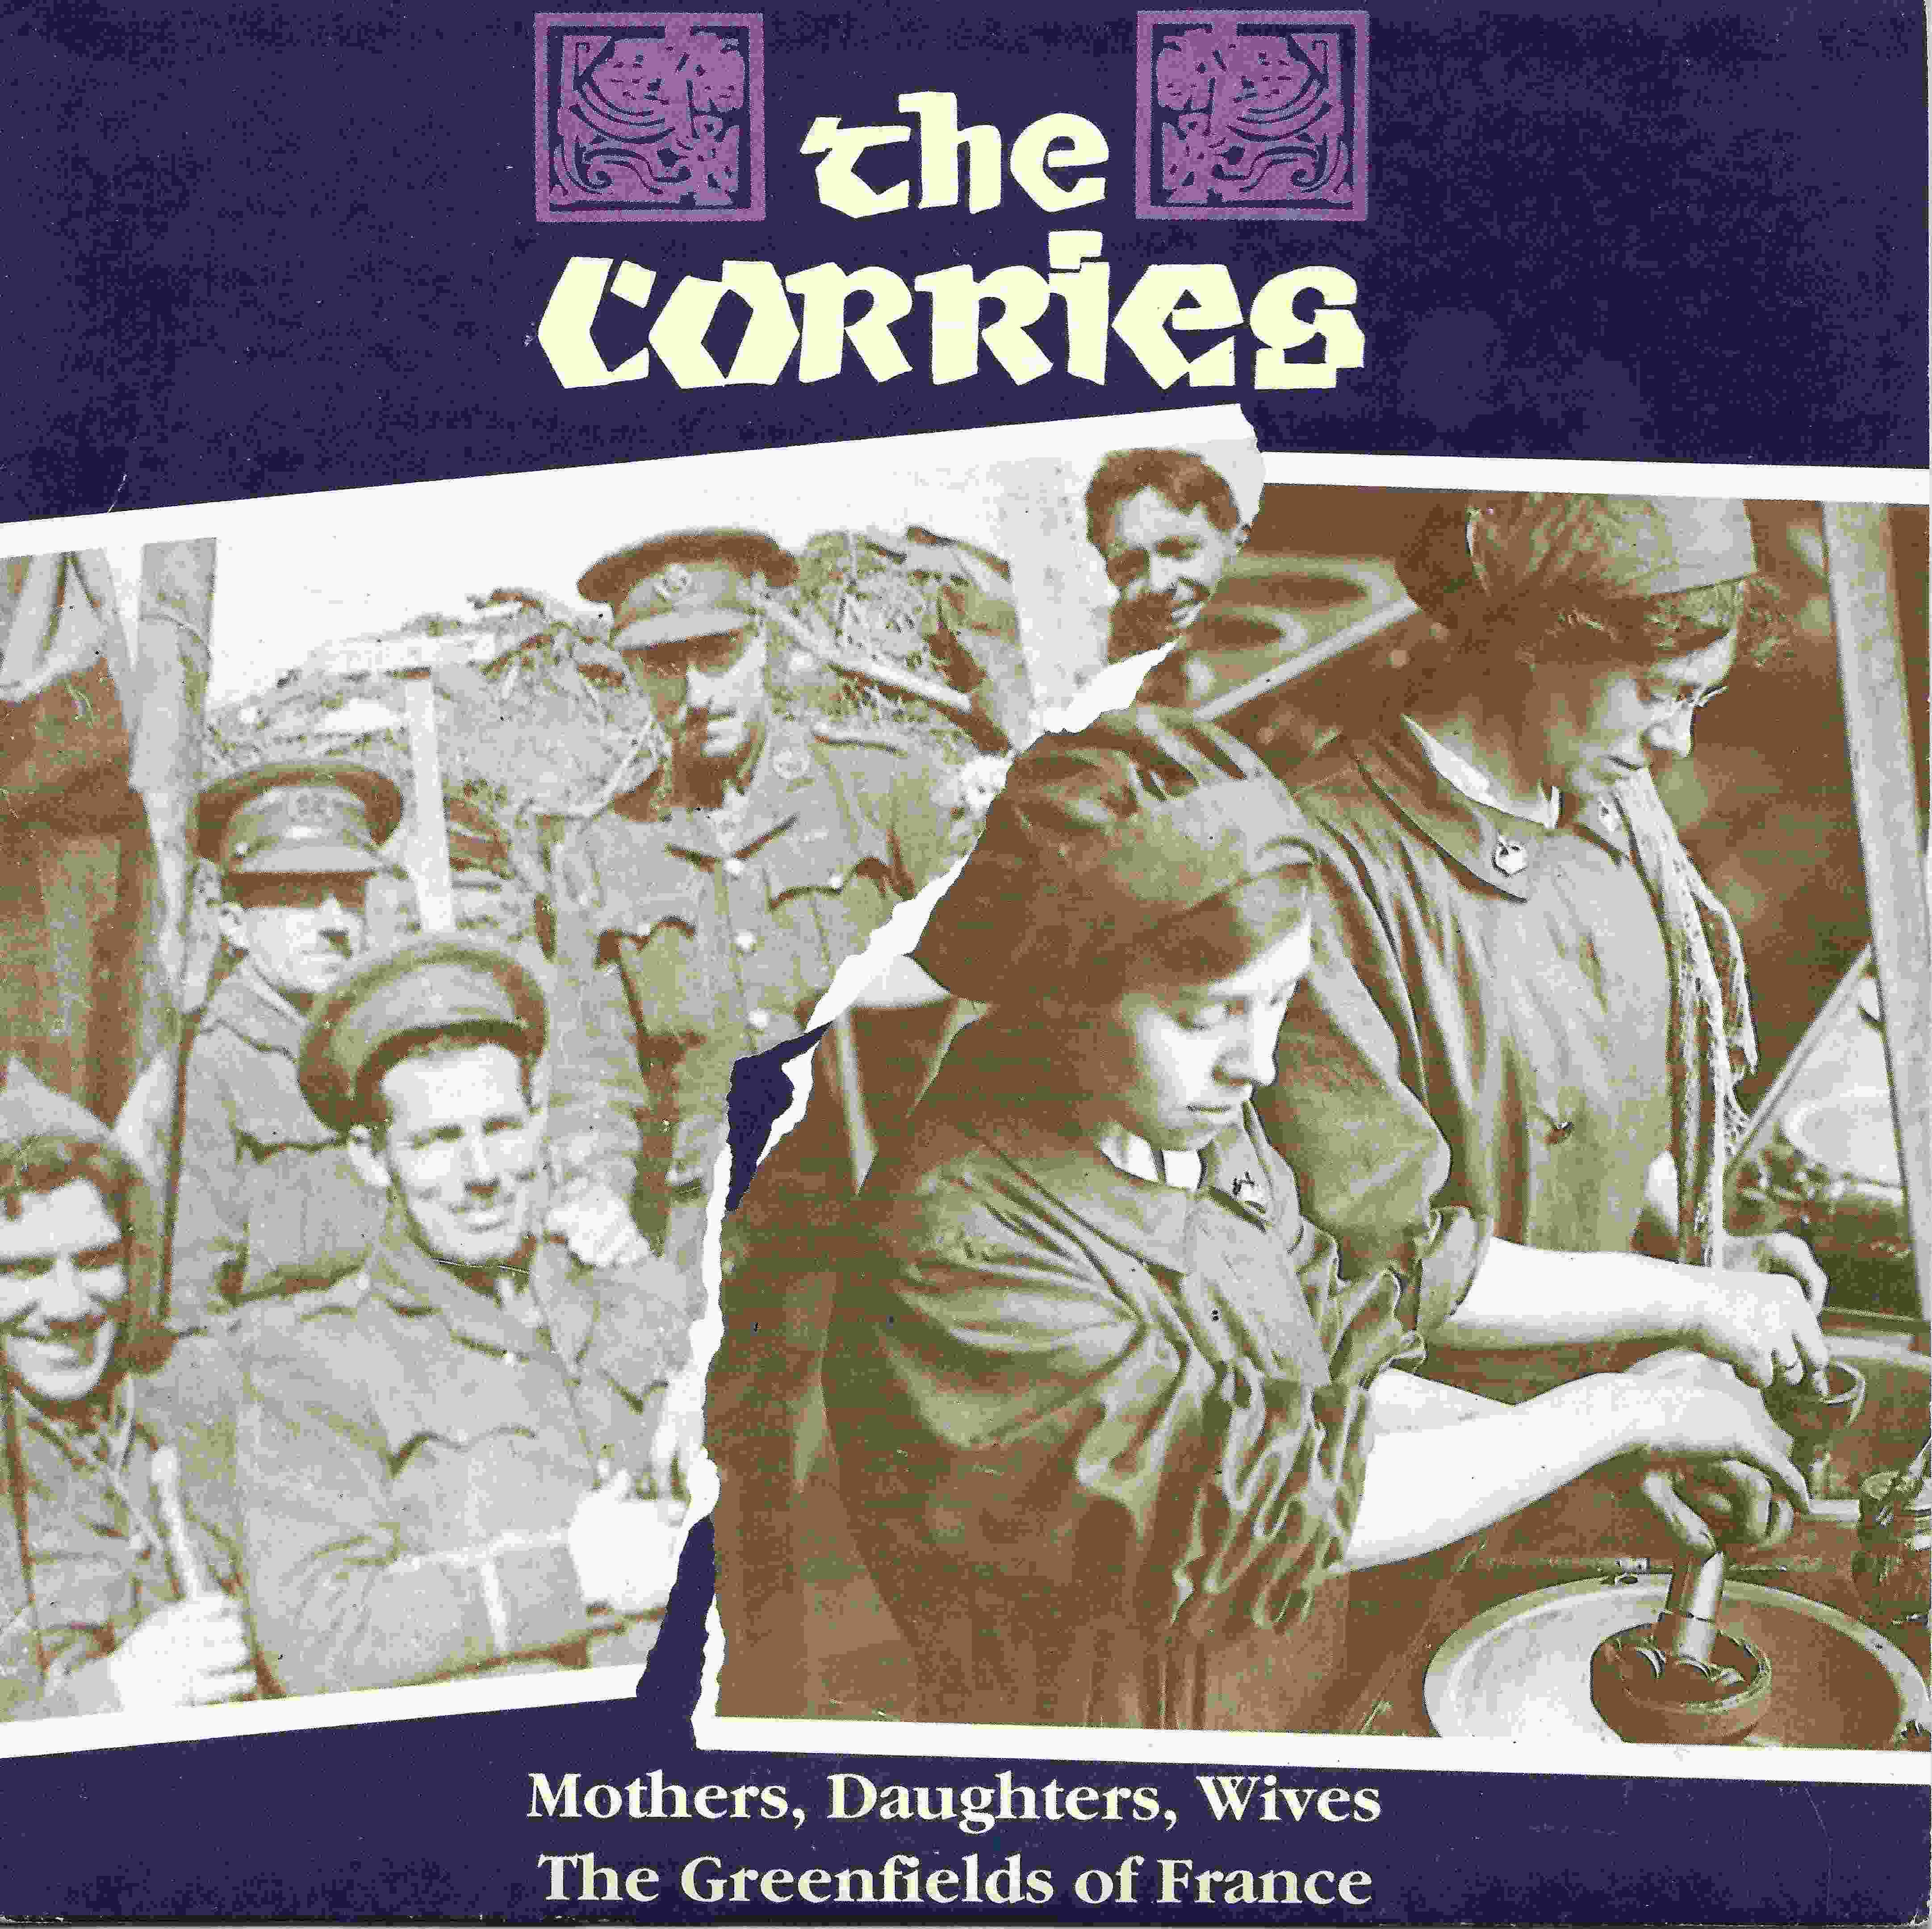 Picture of RESL 819 Mothers, daughters, wives by artist The Corries from the BBC singles - Records and Tapes library